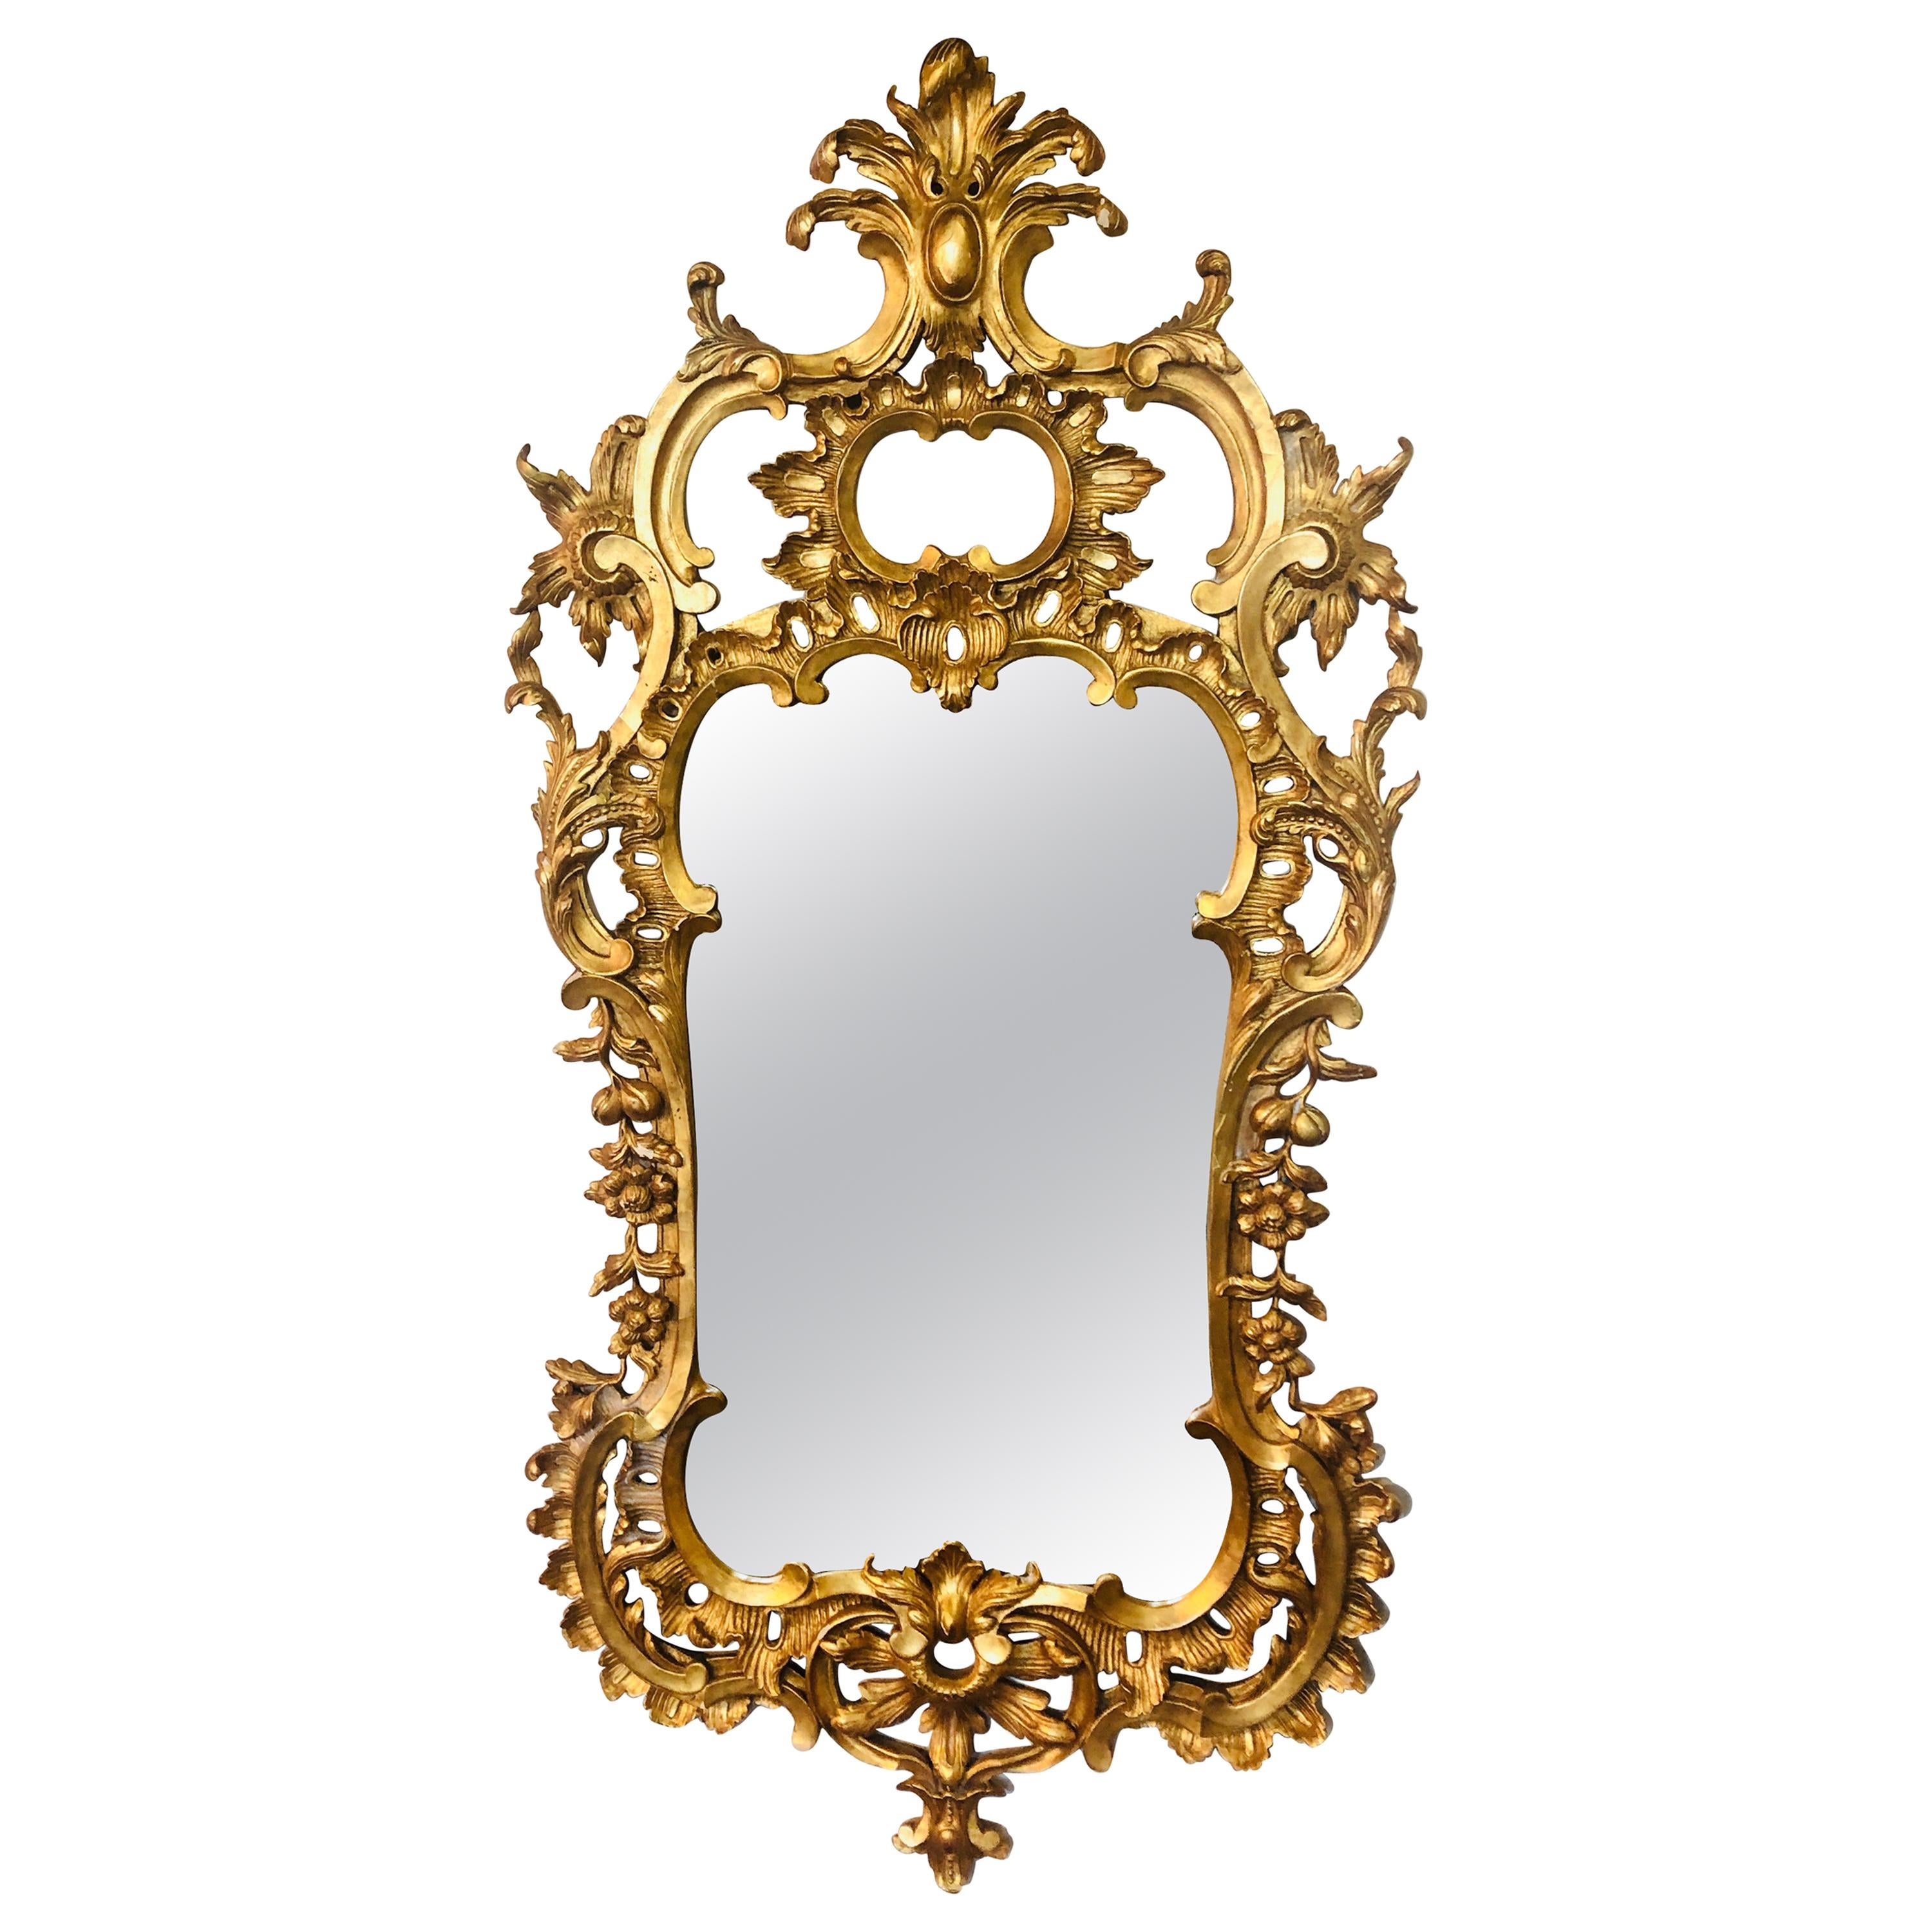 Carved Gilt Gold Leaf Italian Wall or Console Mirror in Rococo Renaissance Form